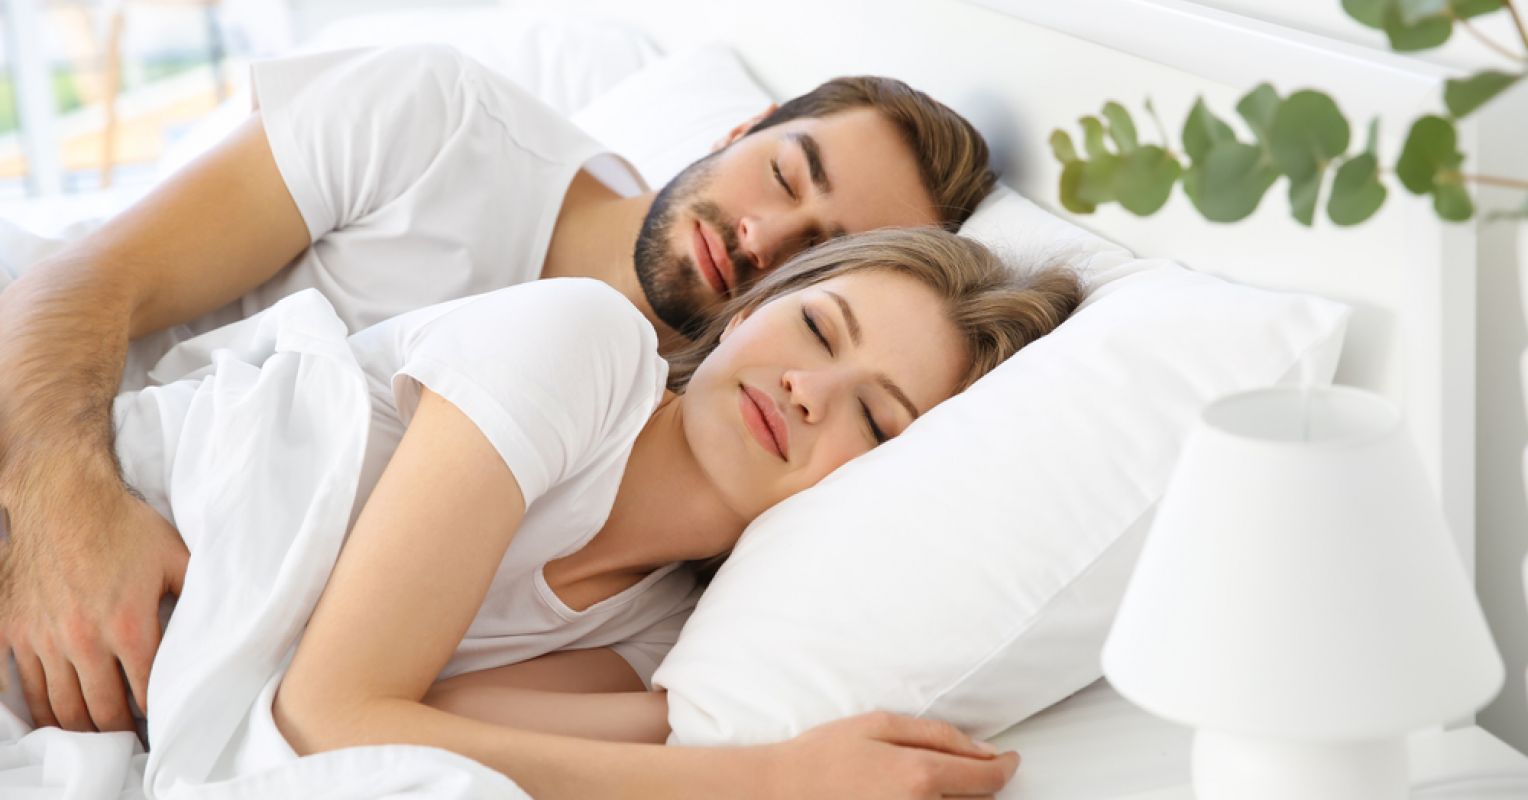 The Significant Benefits of Sleeping Next to a Partner